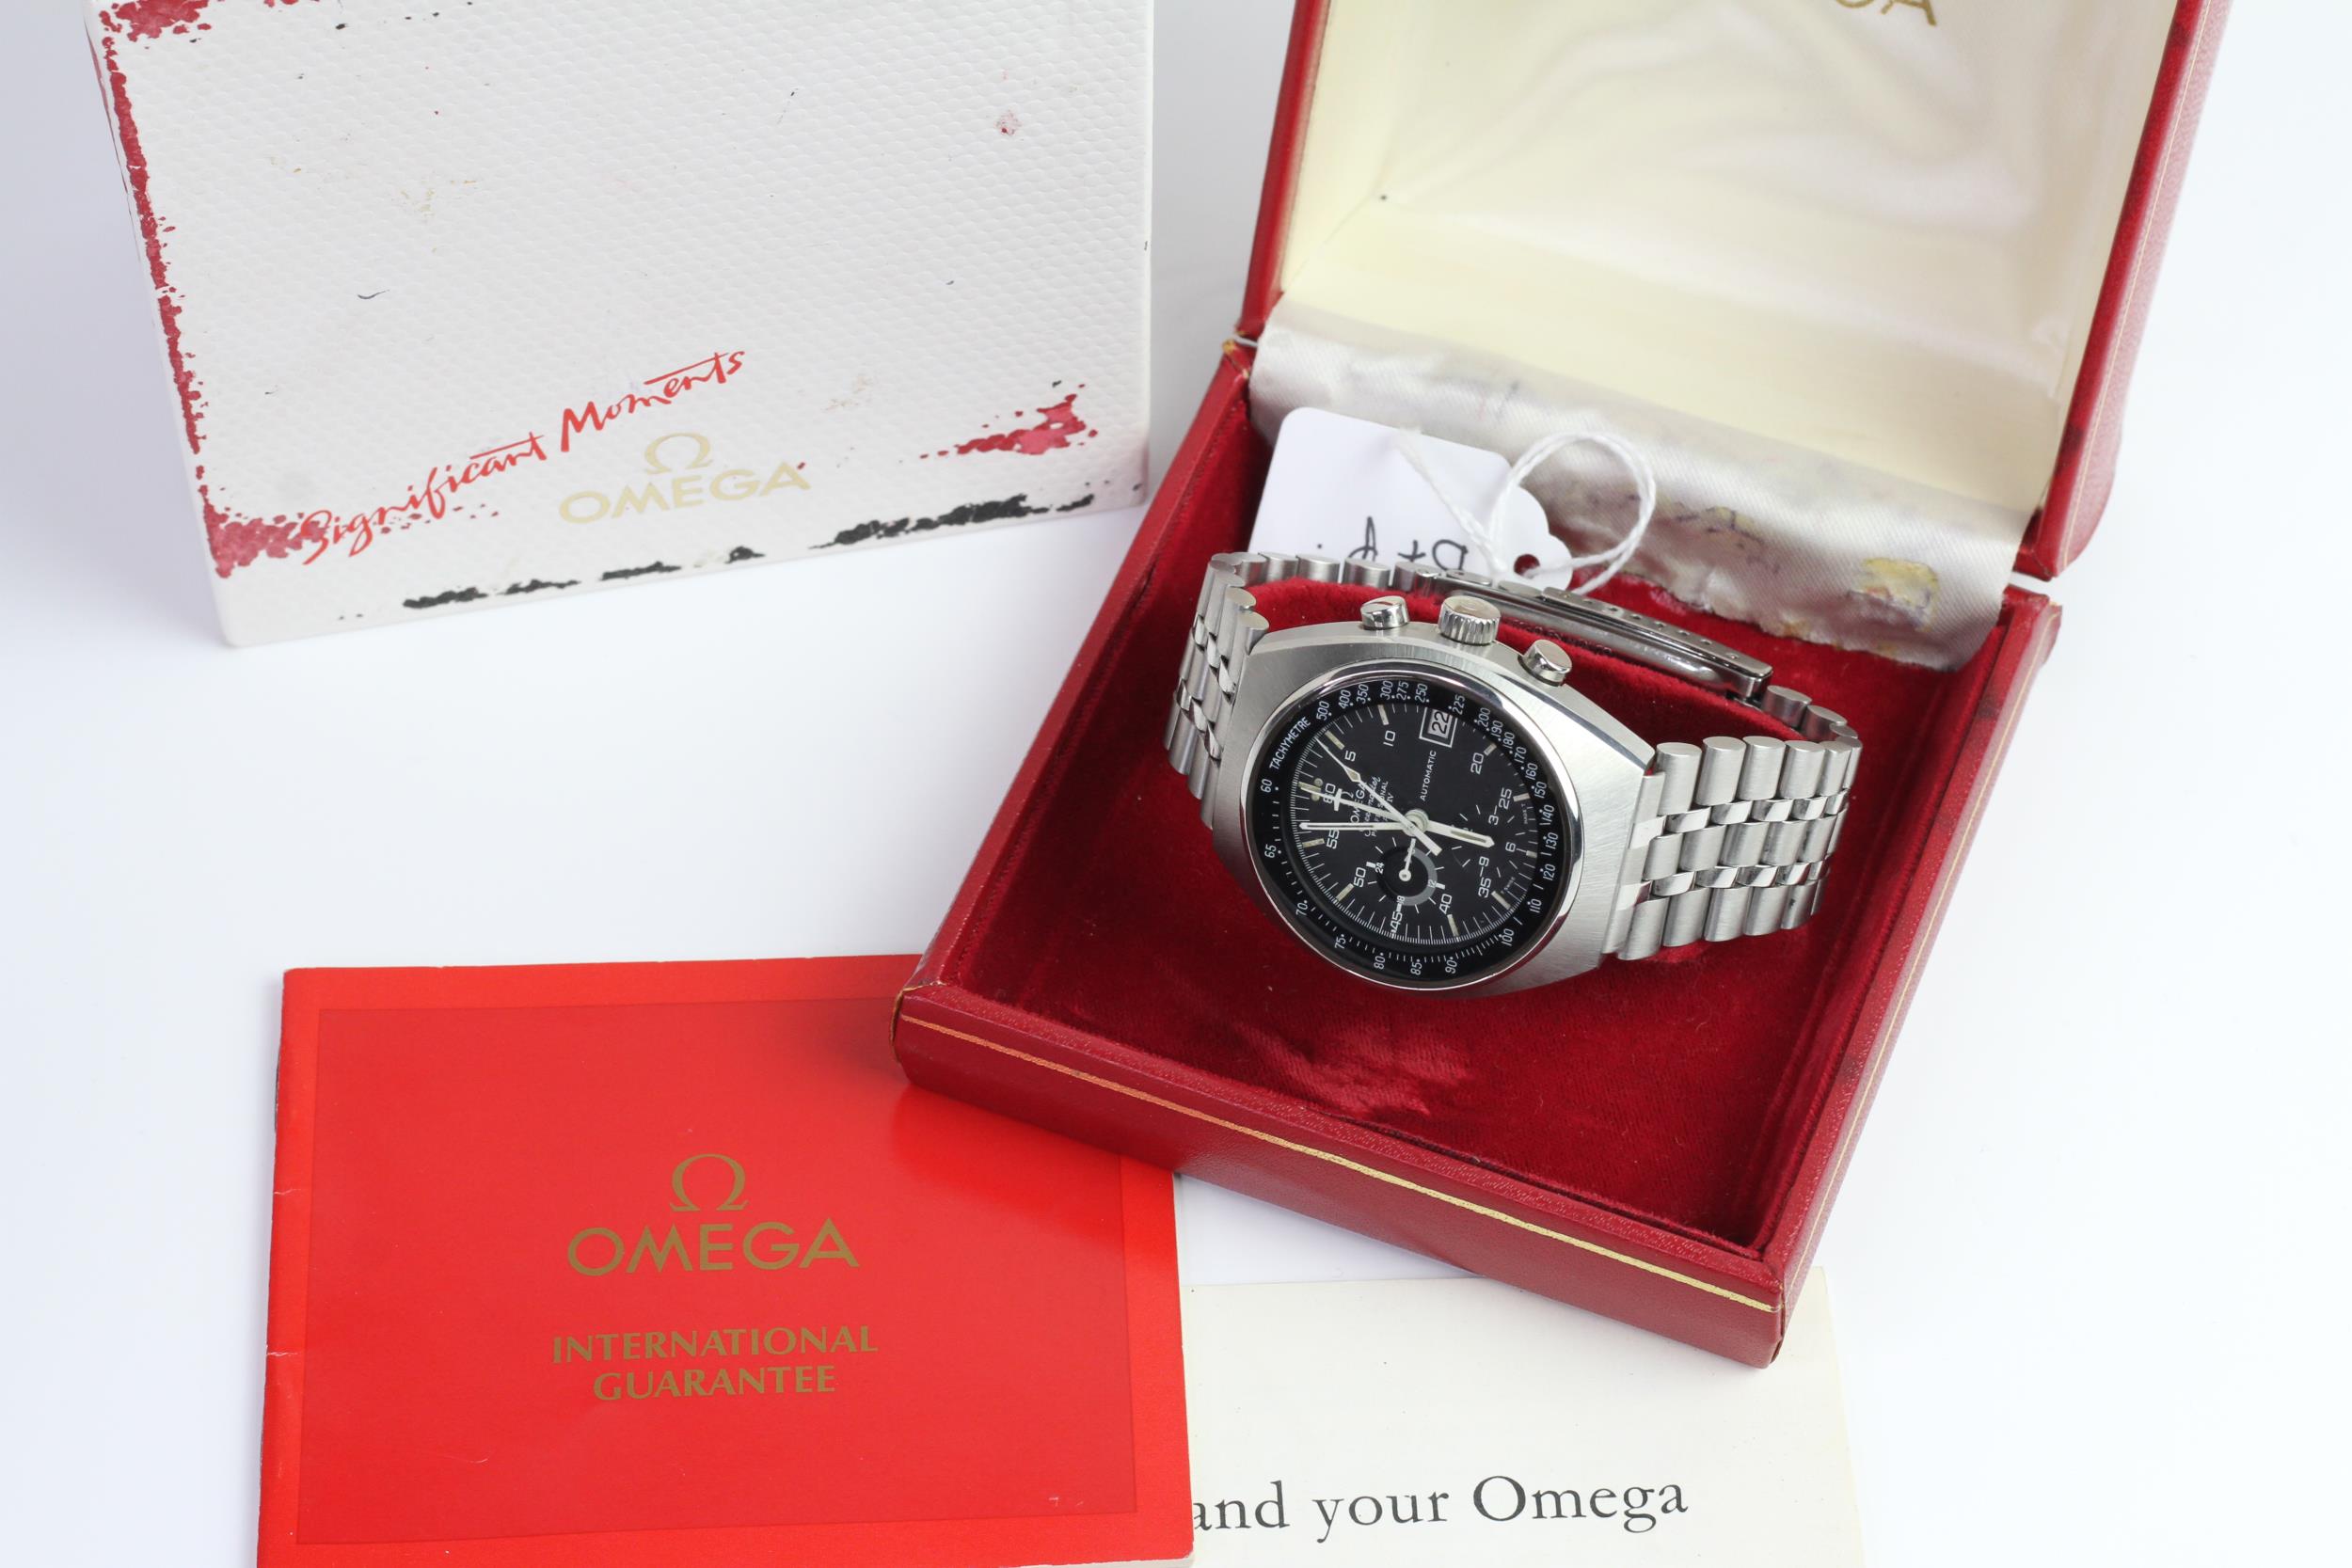 VINTAGE OMEGA SPEEDMASTER MKIV REFERENCE 176.009 WITH BOX AND PAPERS, circular black dial, - Image 2 of 10